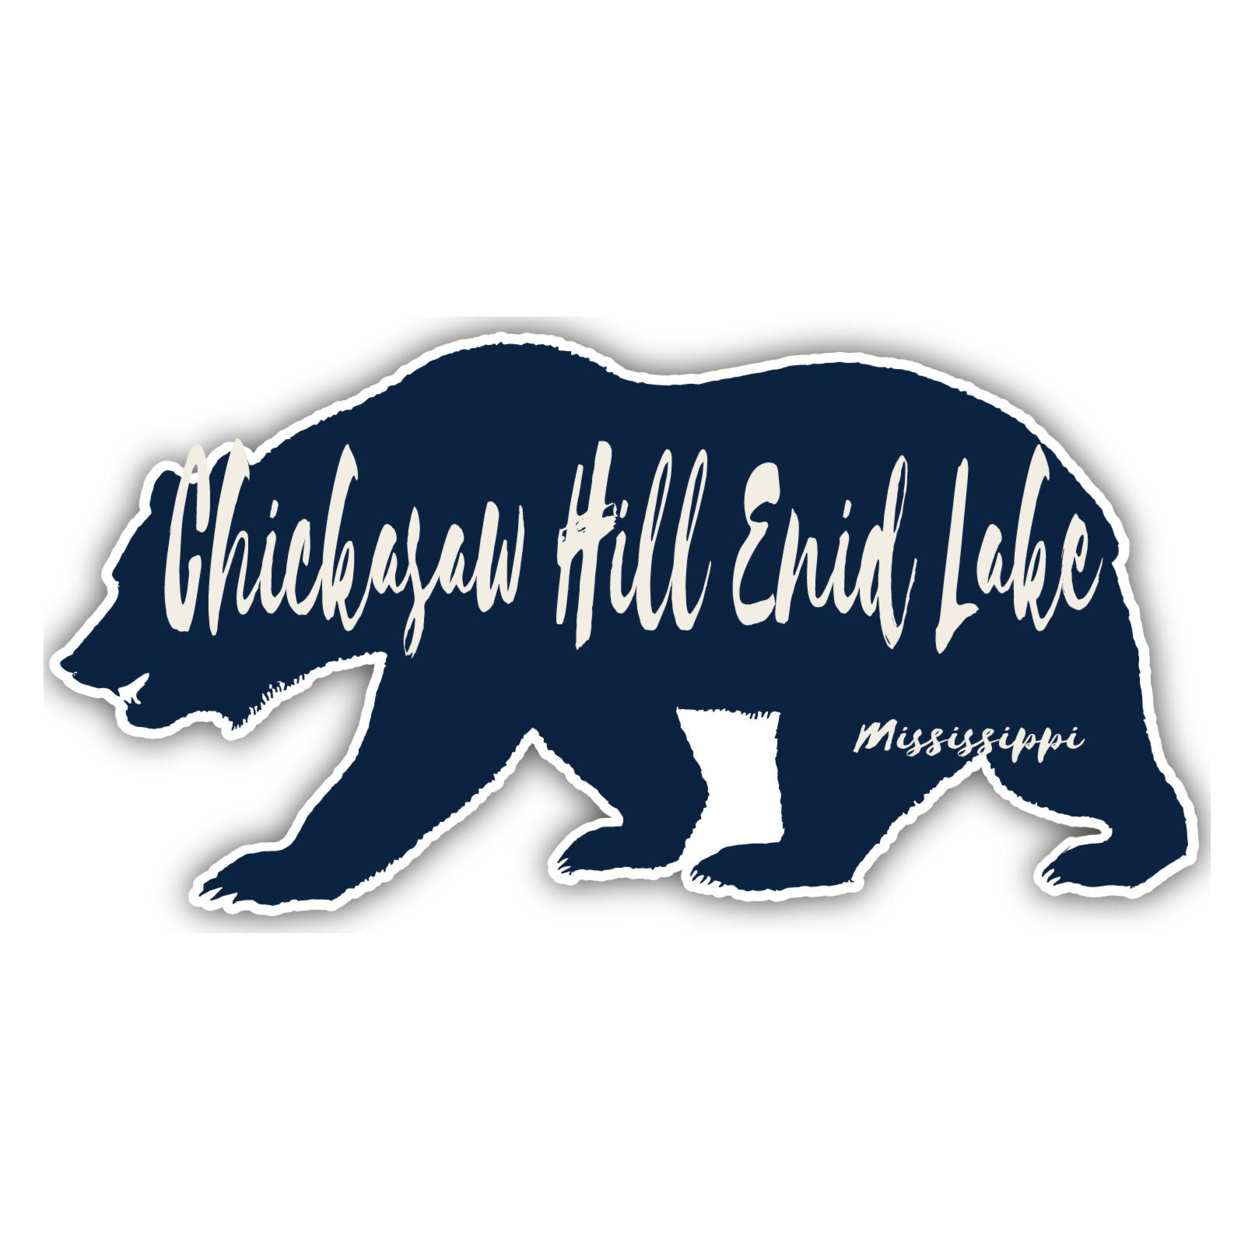 Chickasaw Hill Enid Lake Mississippi Souvenir Decorative Stickers (Choose Theme And Size) - 4-Pack, 4-Inch, Bear